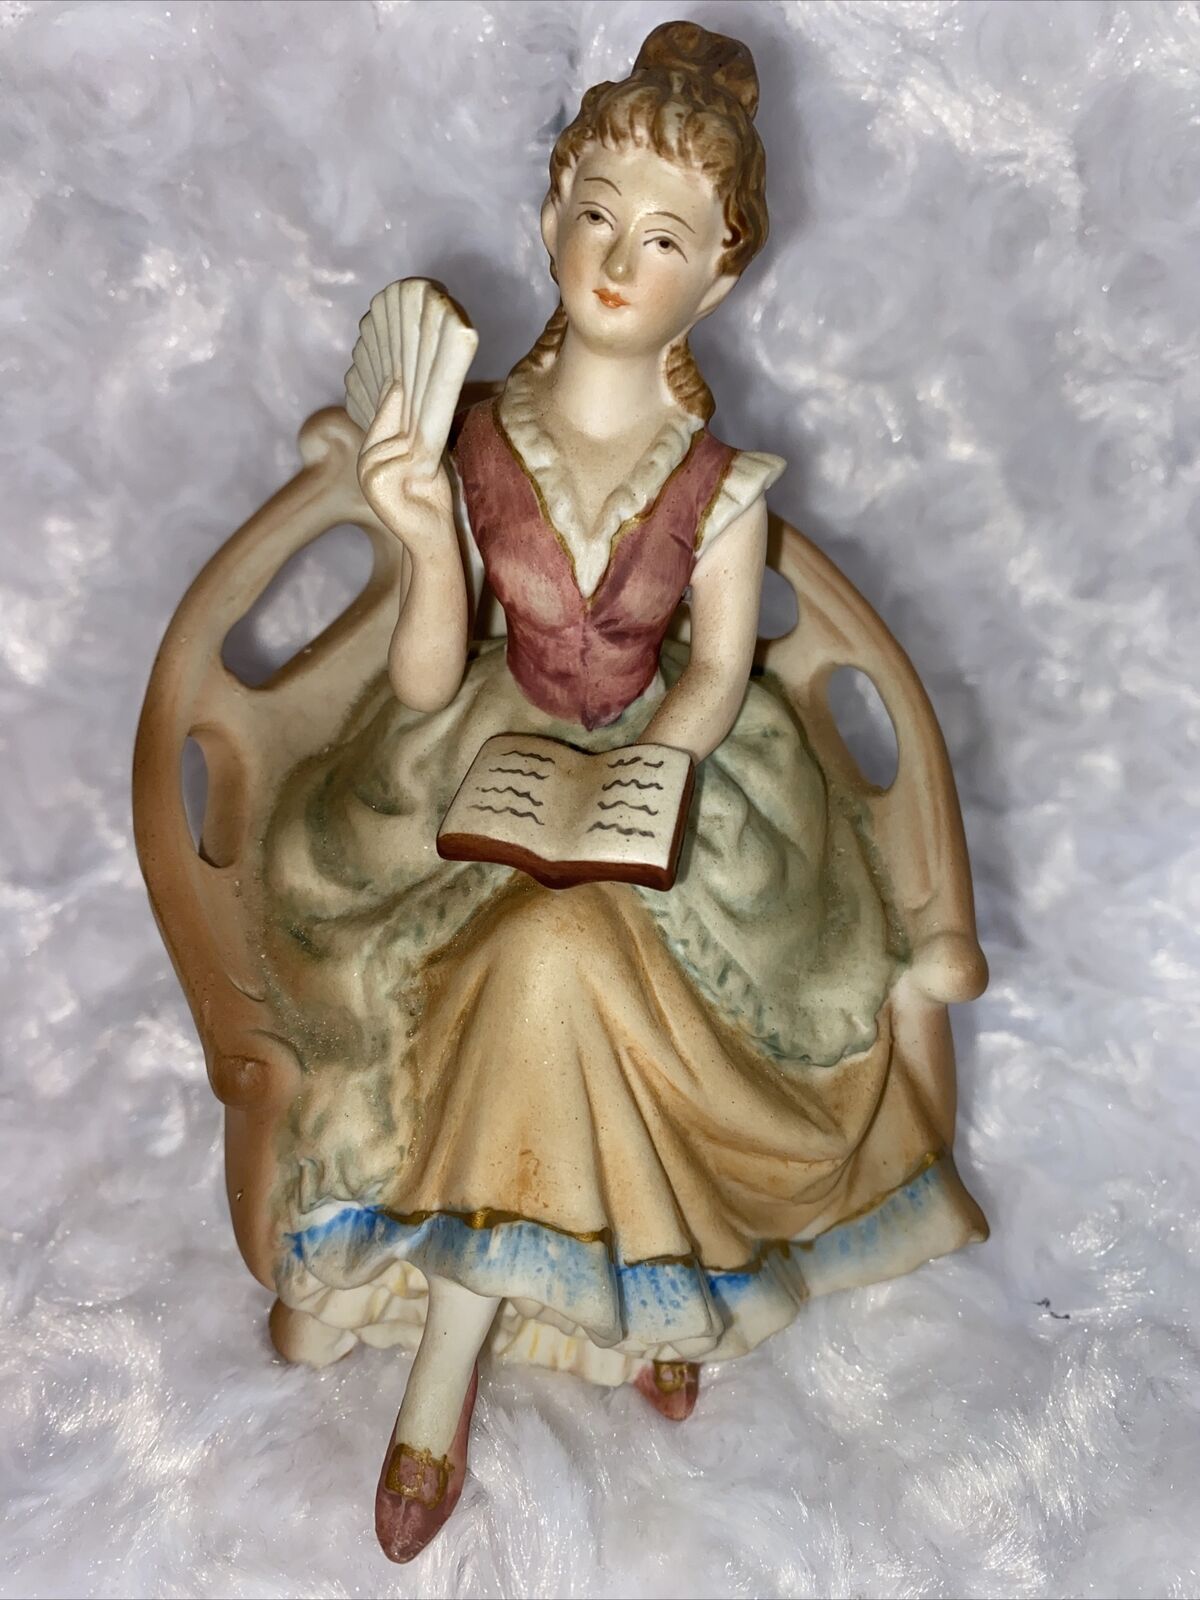 Lefton China Hand Painted Seated Lady With Book And Fan Marked Lefton KW3826